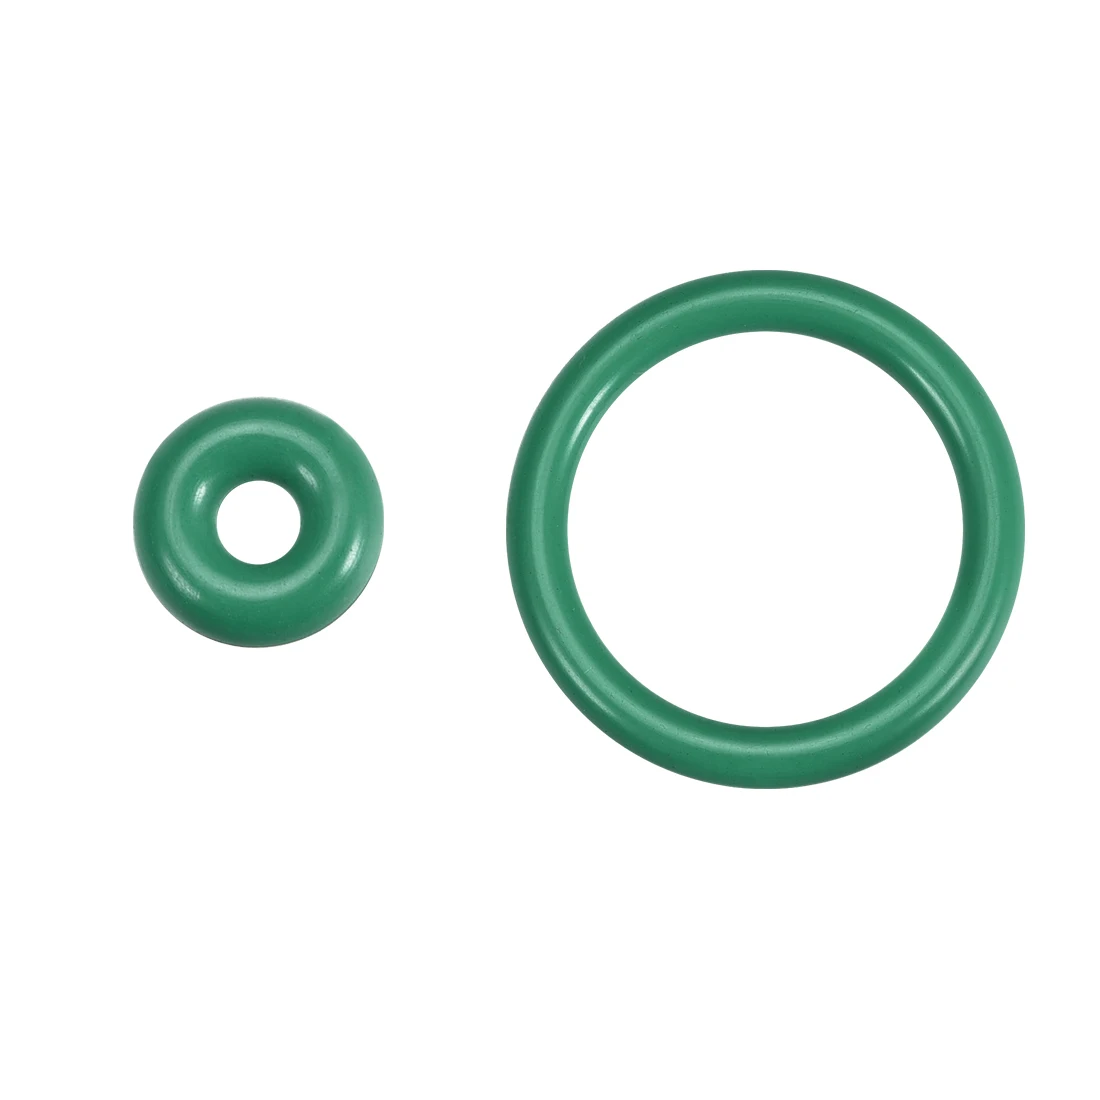 

uxcell 10Pcs Fluorine Rubber O Rings 10-25mm OD 3-18mm I.D 3.5mm Width Seal Gasket Green to Hydraulic and Pneumatic Repairs